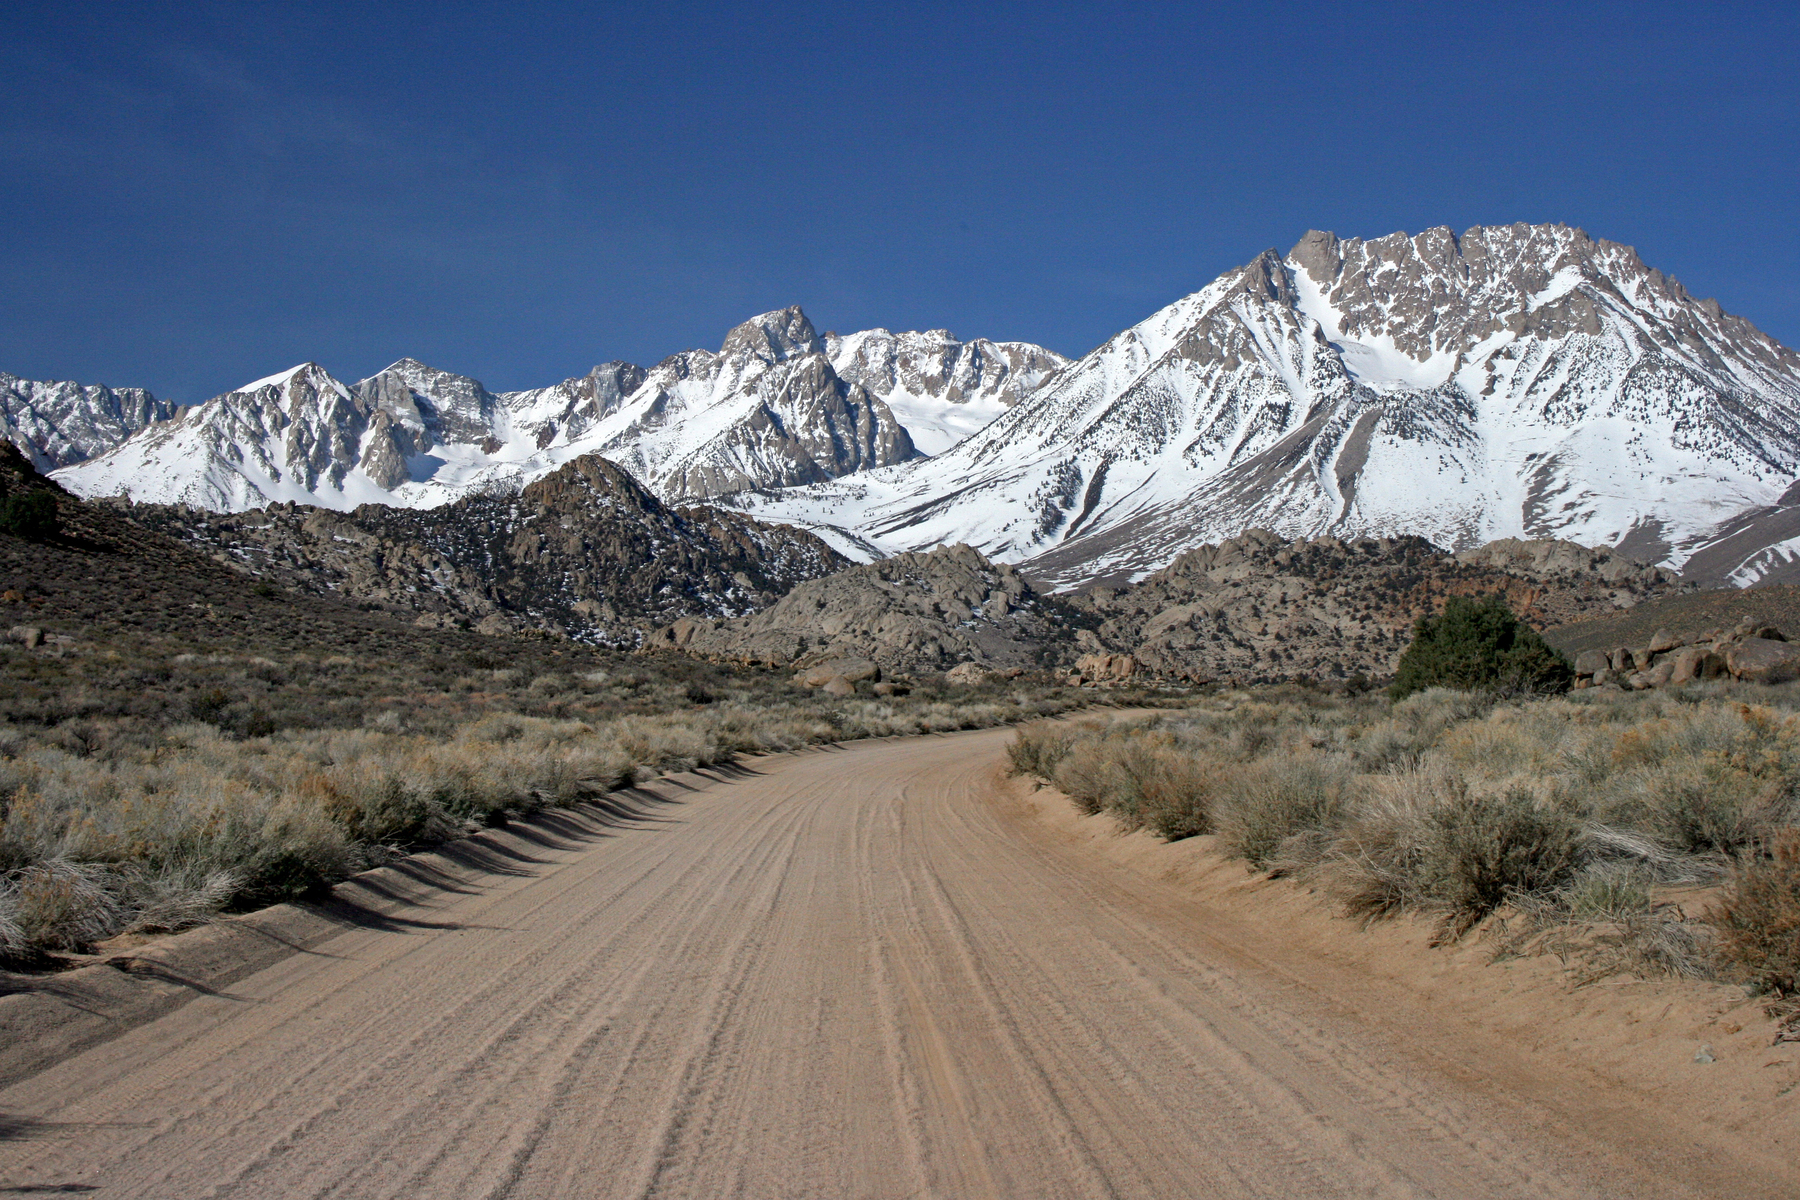 view of Basin Mountain and the Sierra, west of Bishop, California